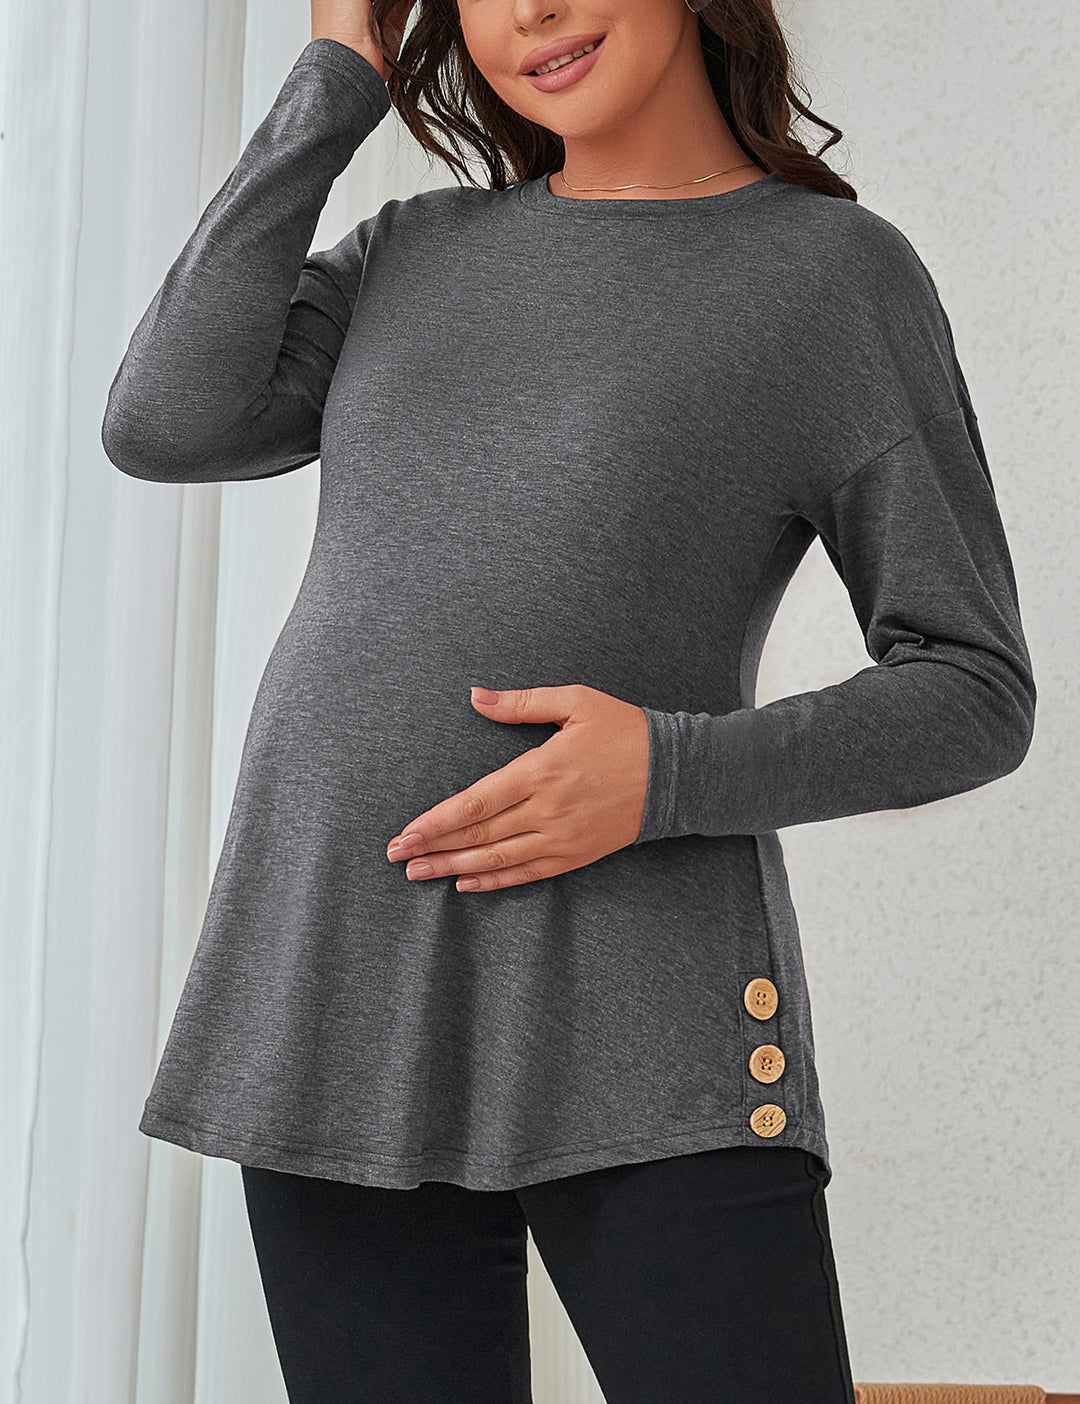 Round Neck Loose Pregnancy Tunic Top with Buttons